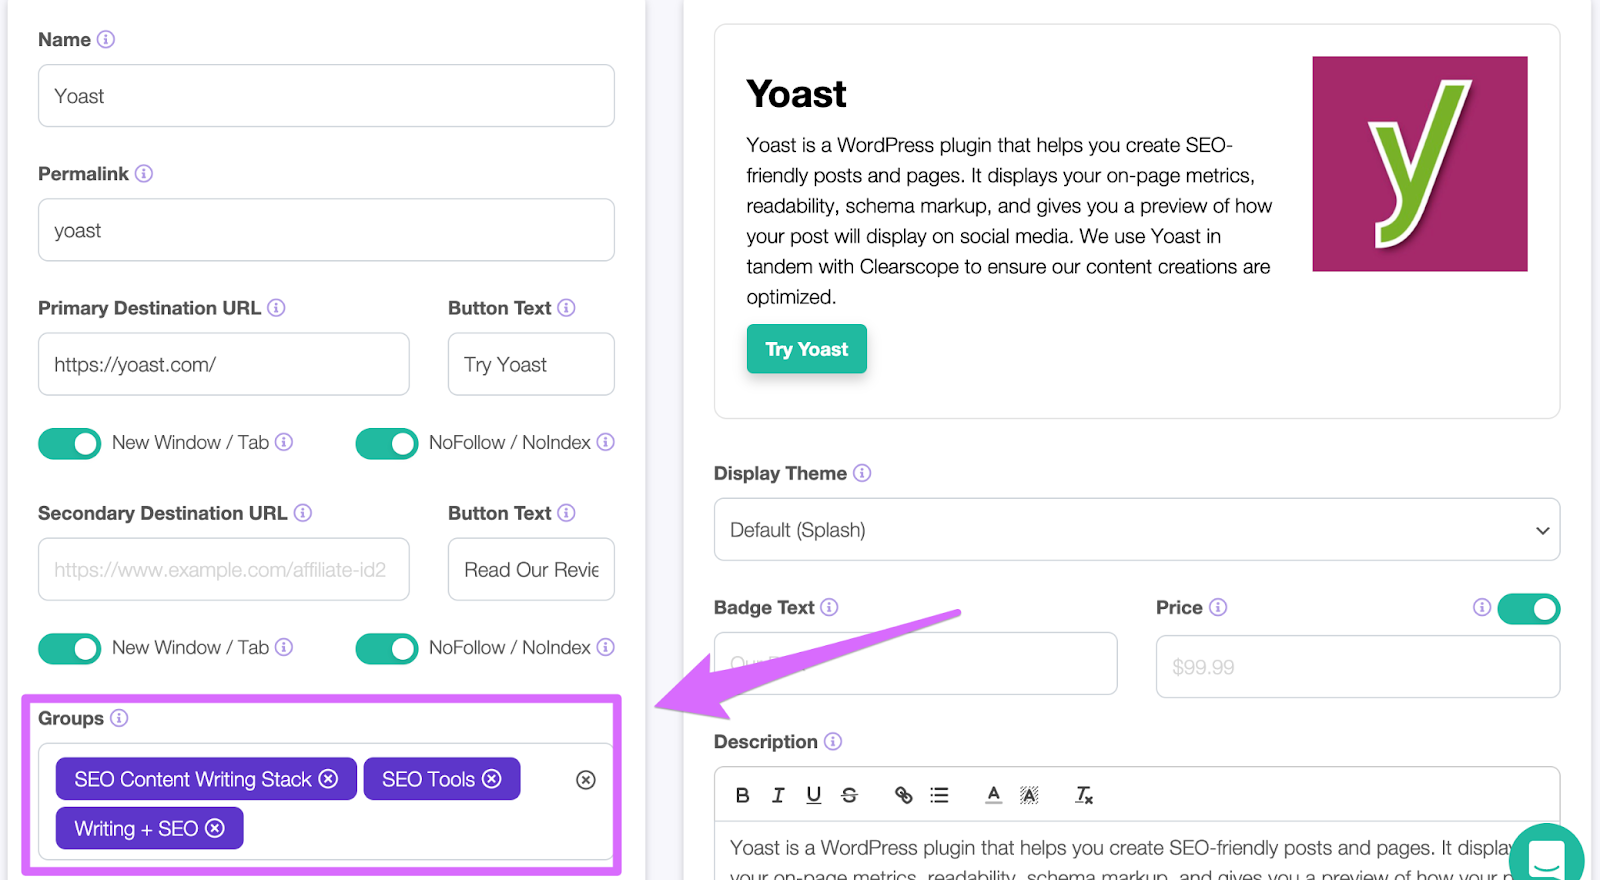 Yoast link details page belonging to multiple groups